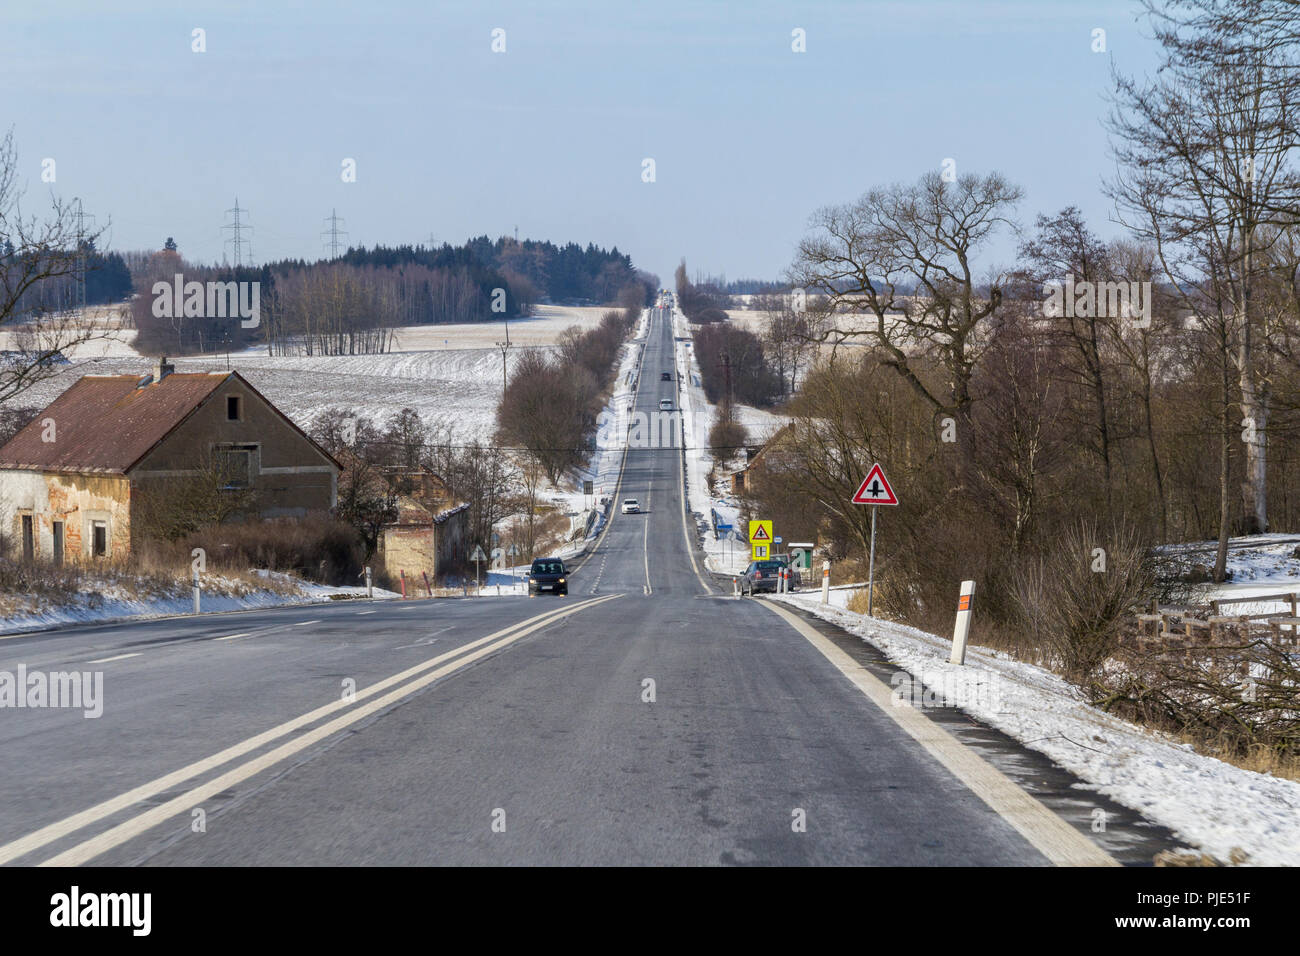 roadside scenery in the Czech Republic at winter time Stock Photo